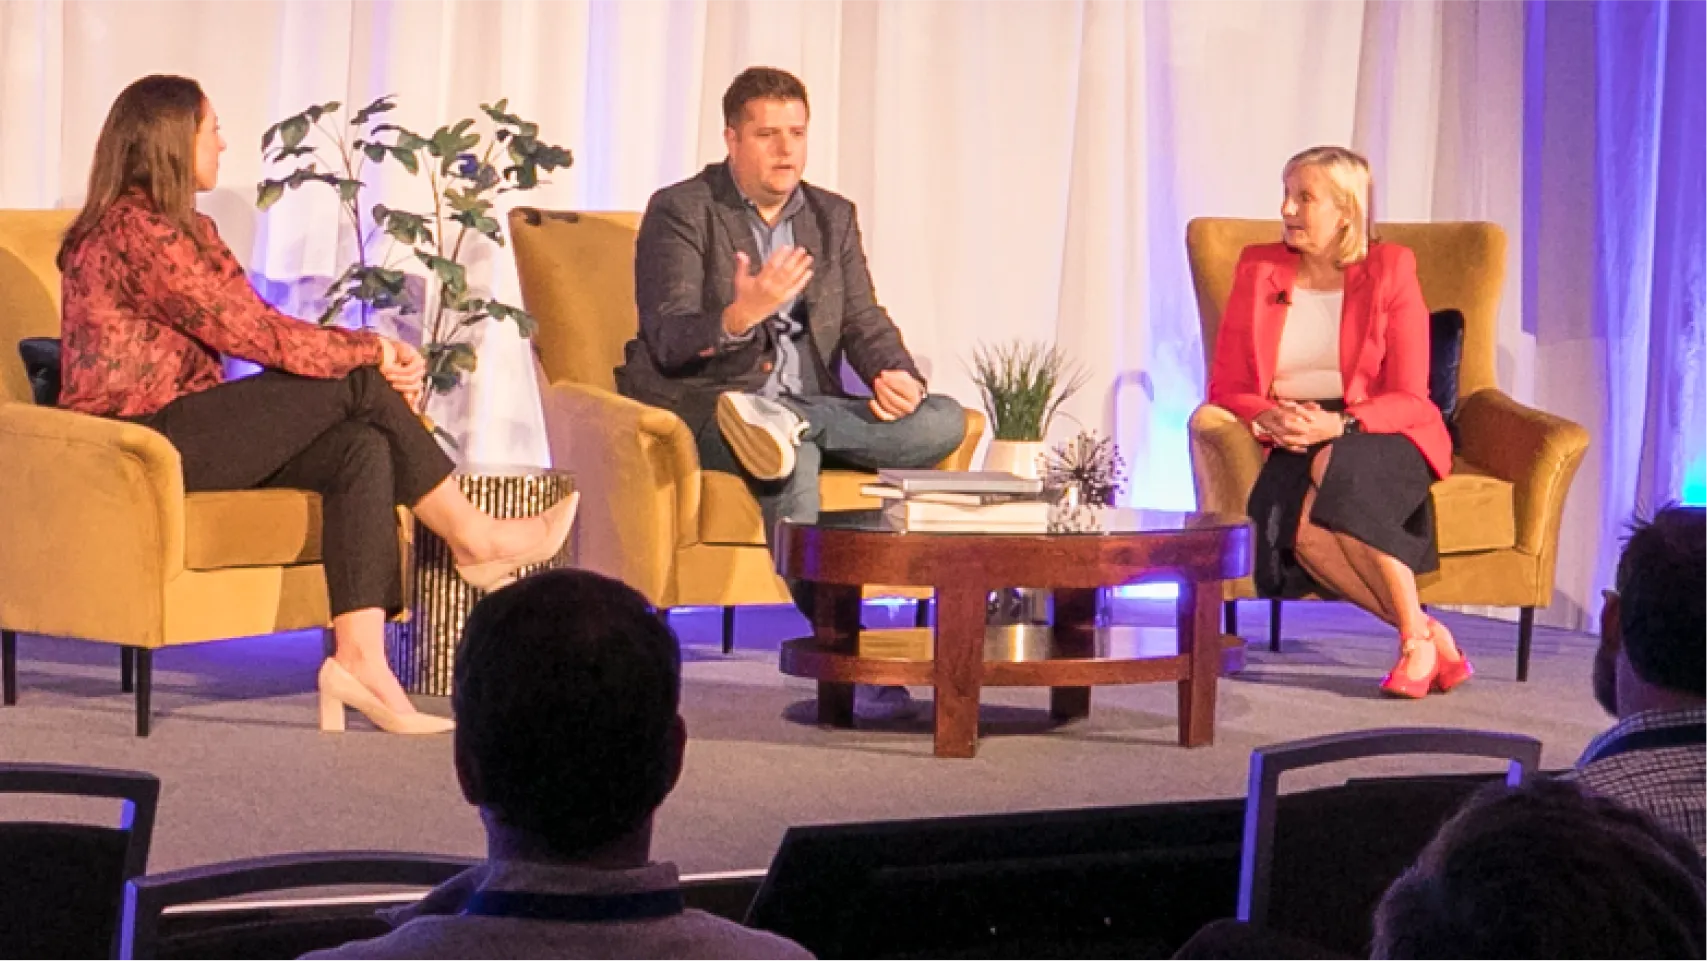 Three business professionals sit on stage and chat in front of an audience.